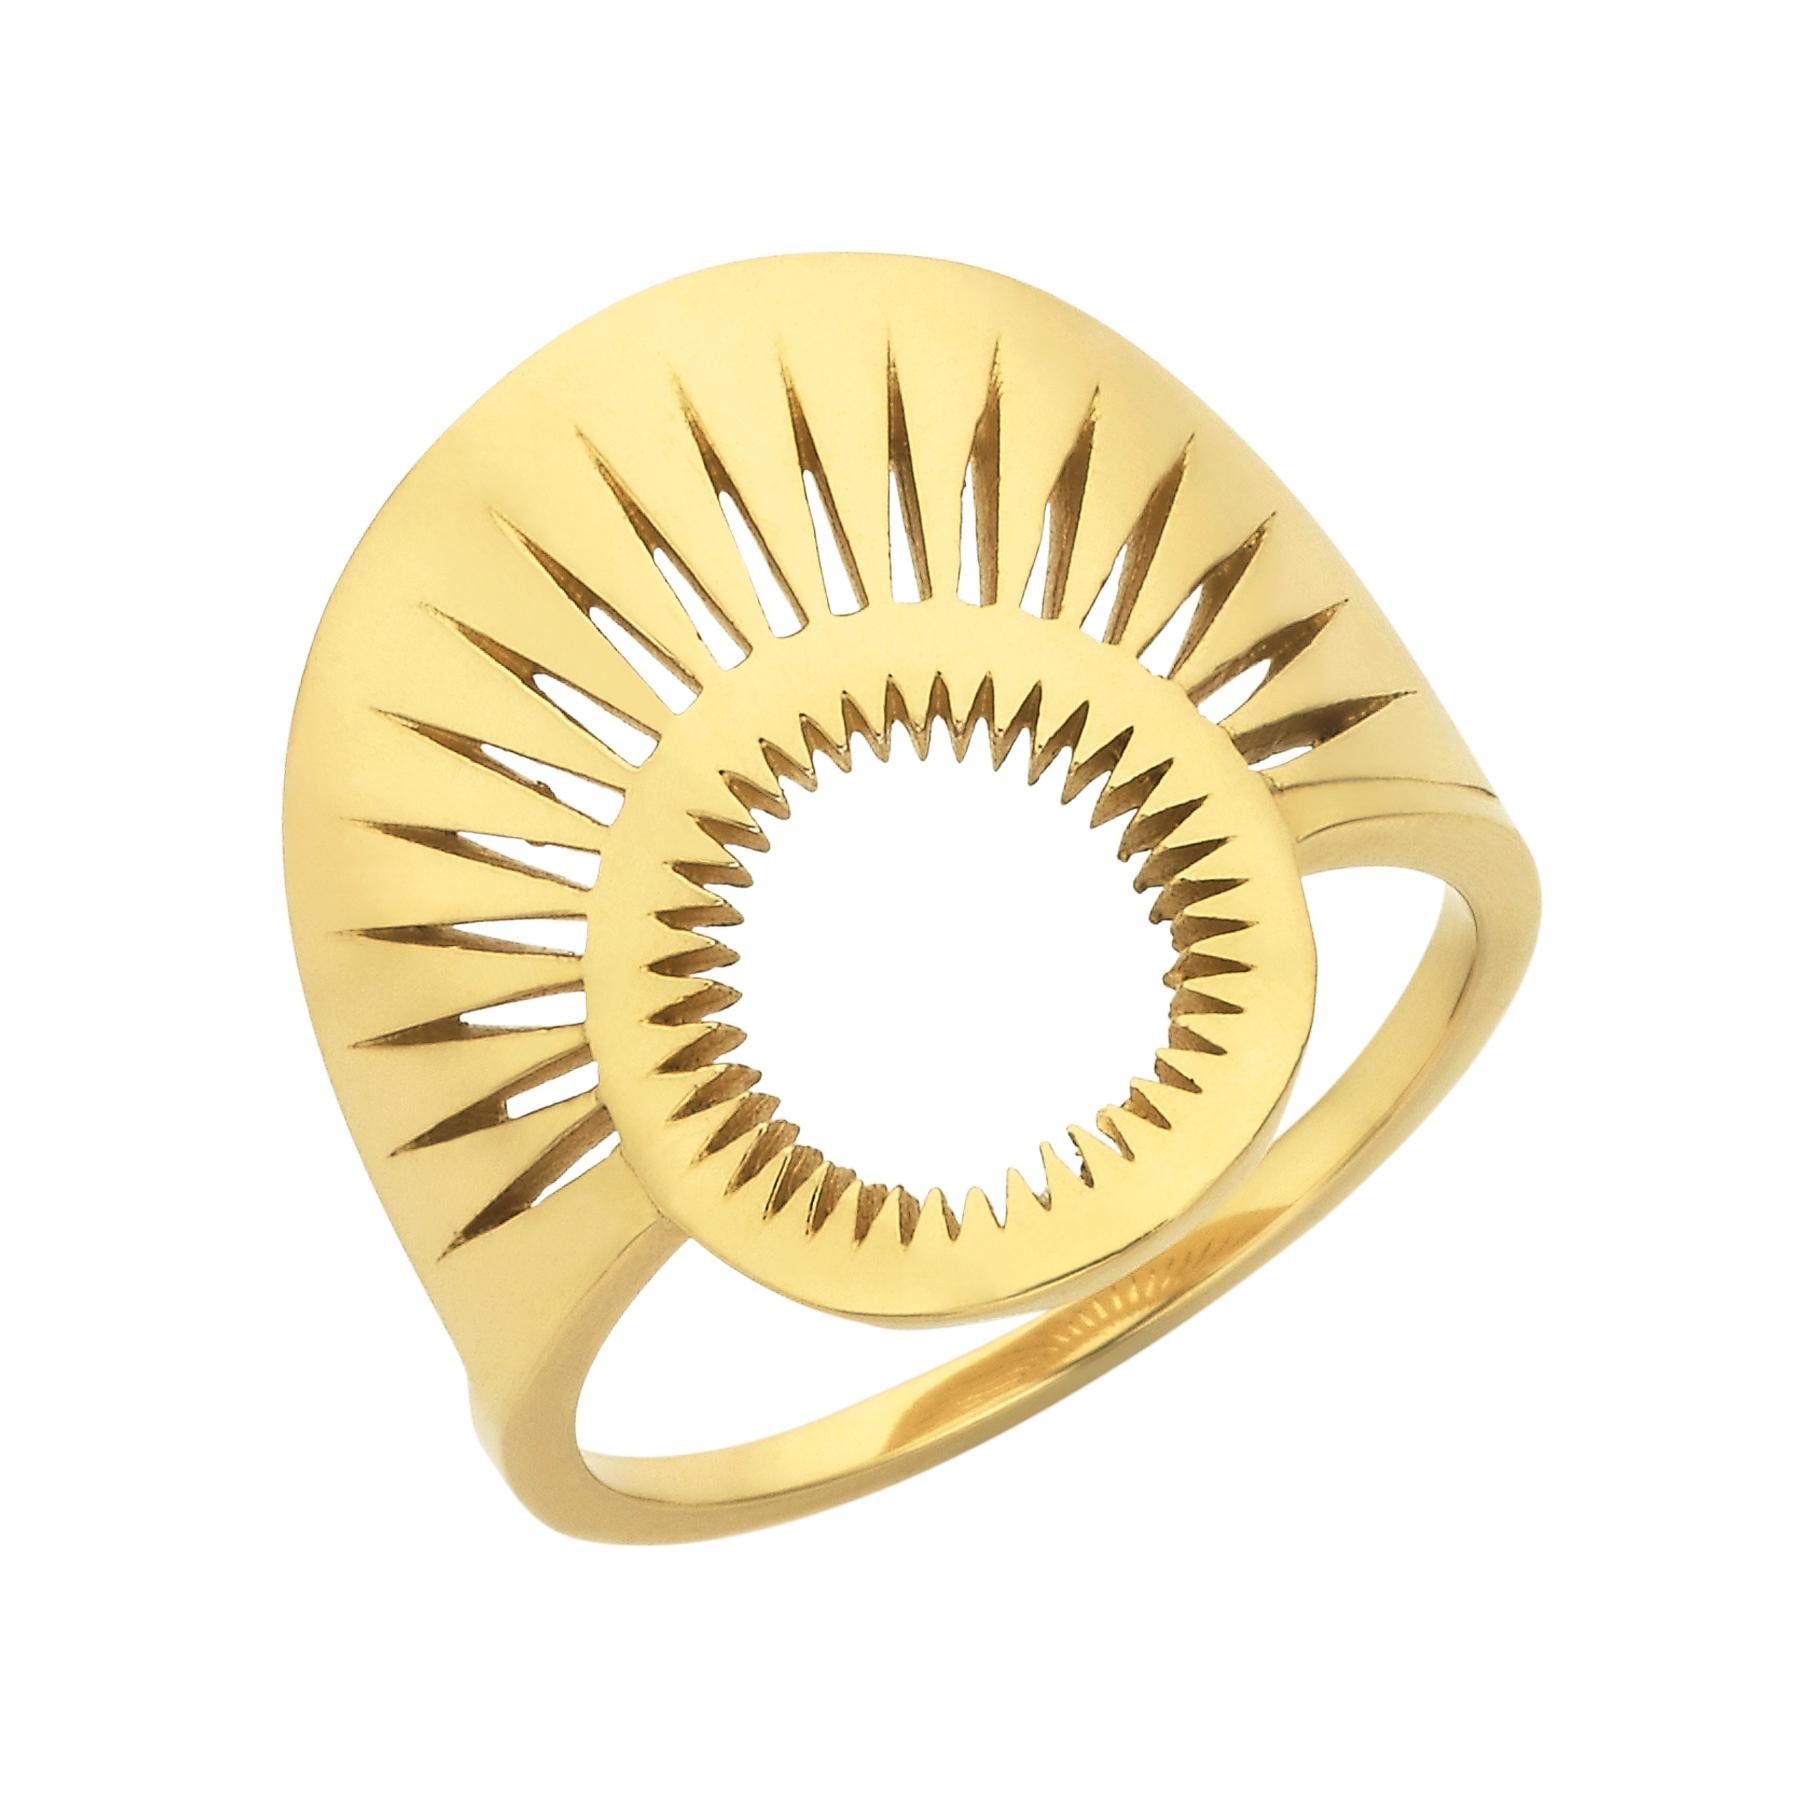 Ring sizes: S, M, L

The Pocket Full of Sunshine ring creates the shapes made by the Sun as it sits over the sea, and the reflections of light cast over the water. The curved ring makes a striking statement as the fine cut-out detailing reveals